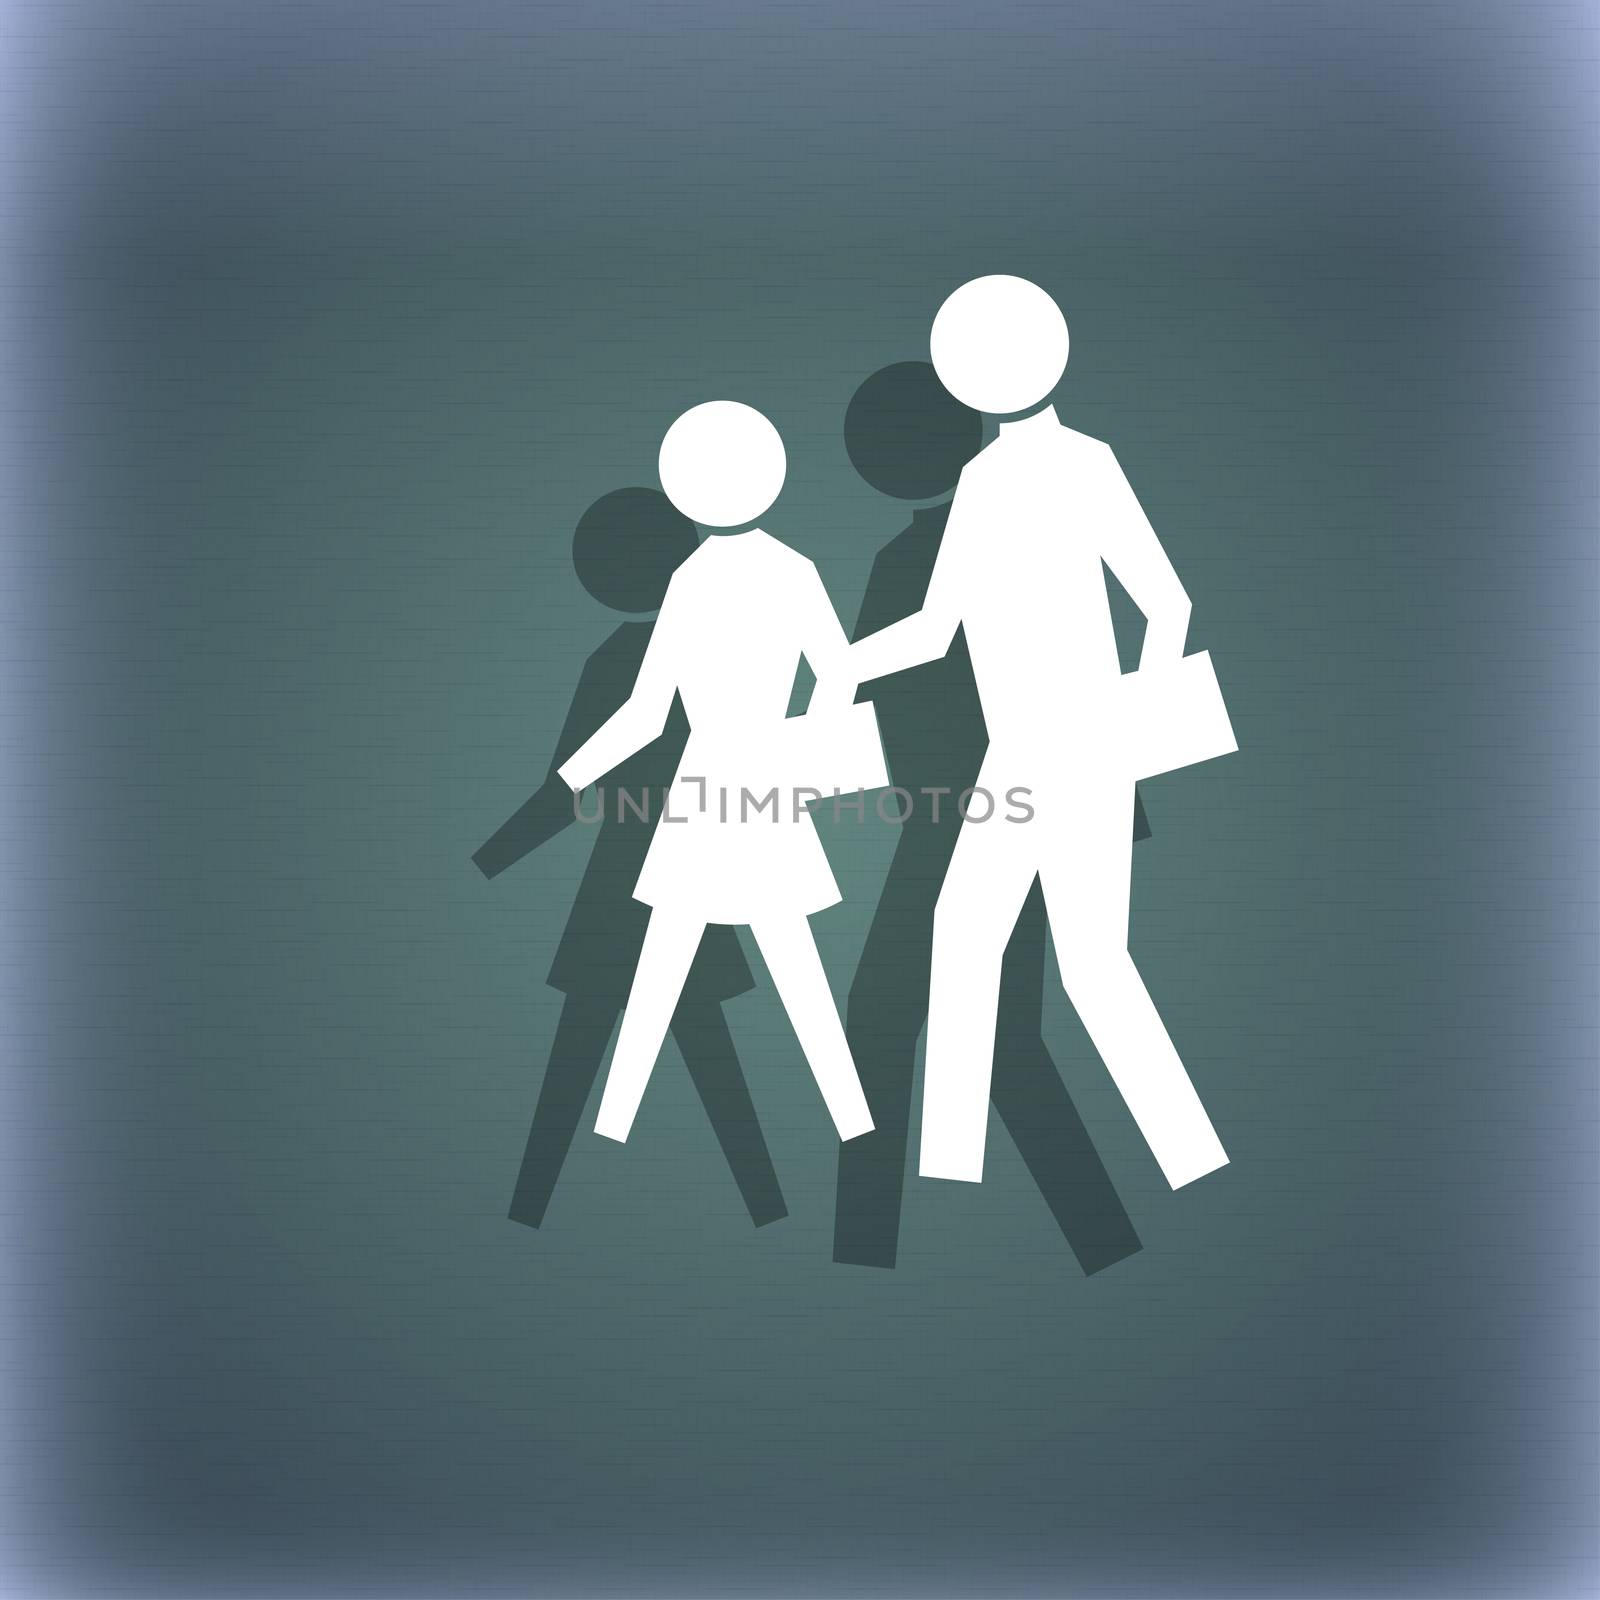 crosswalk icon symbol on the blue-green abstract background with shadow and space for your text. illustration